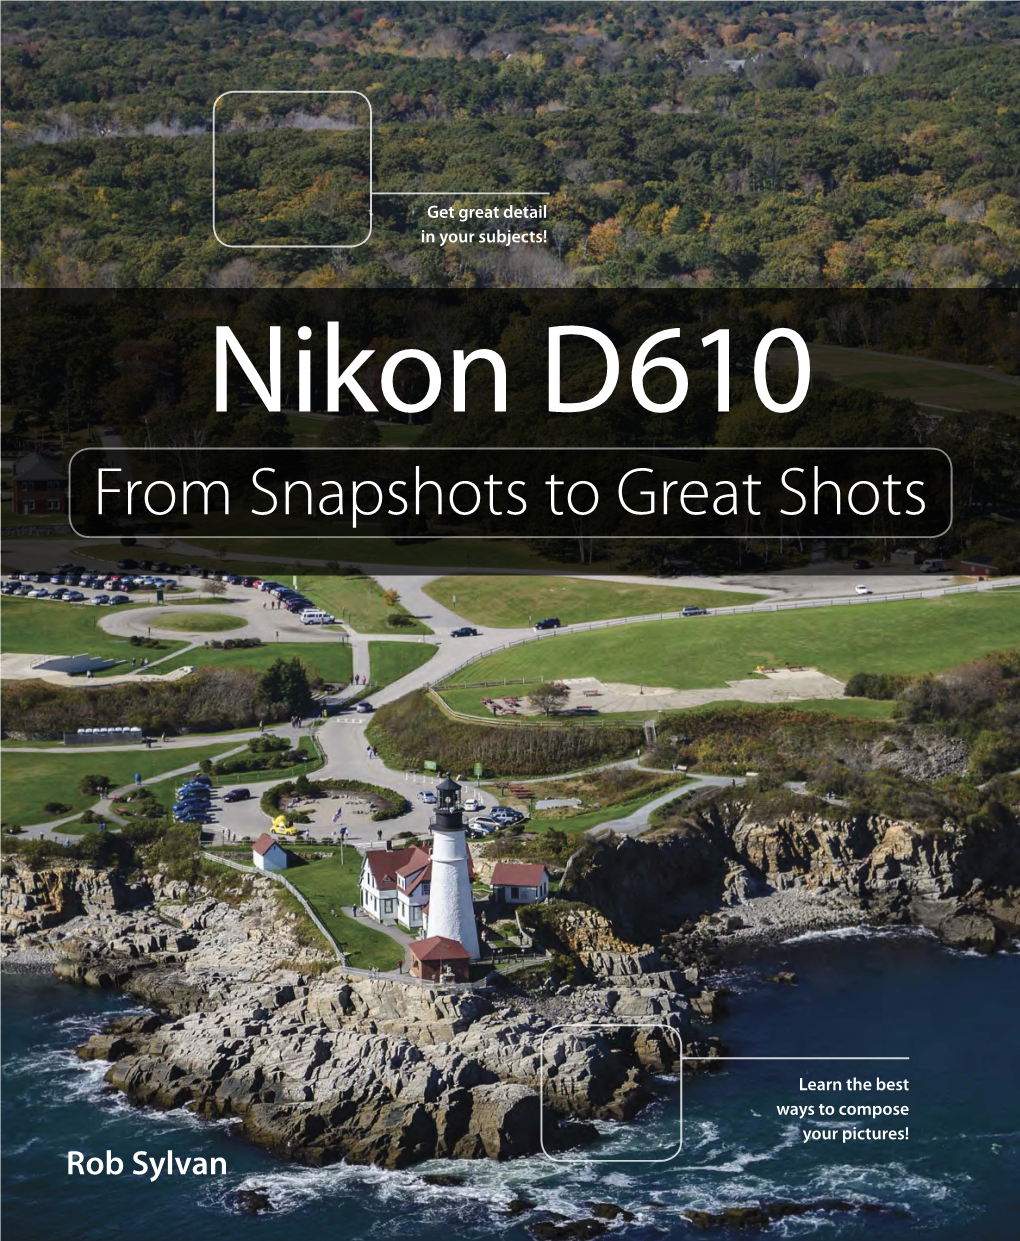 Nikon D610 from Snapshots to Great Shots